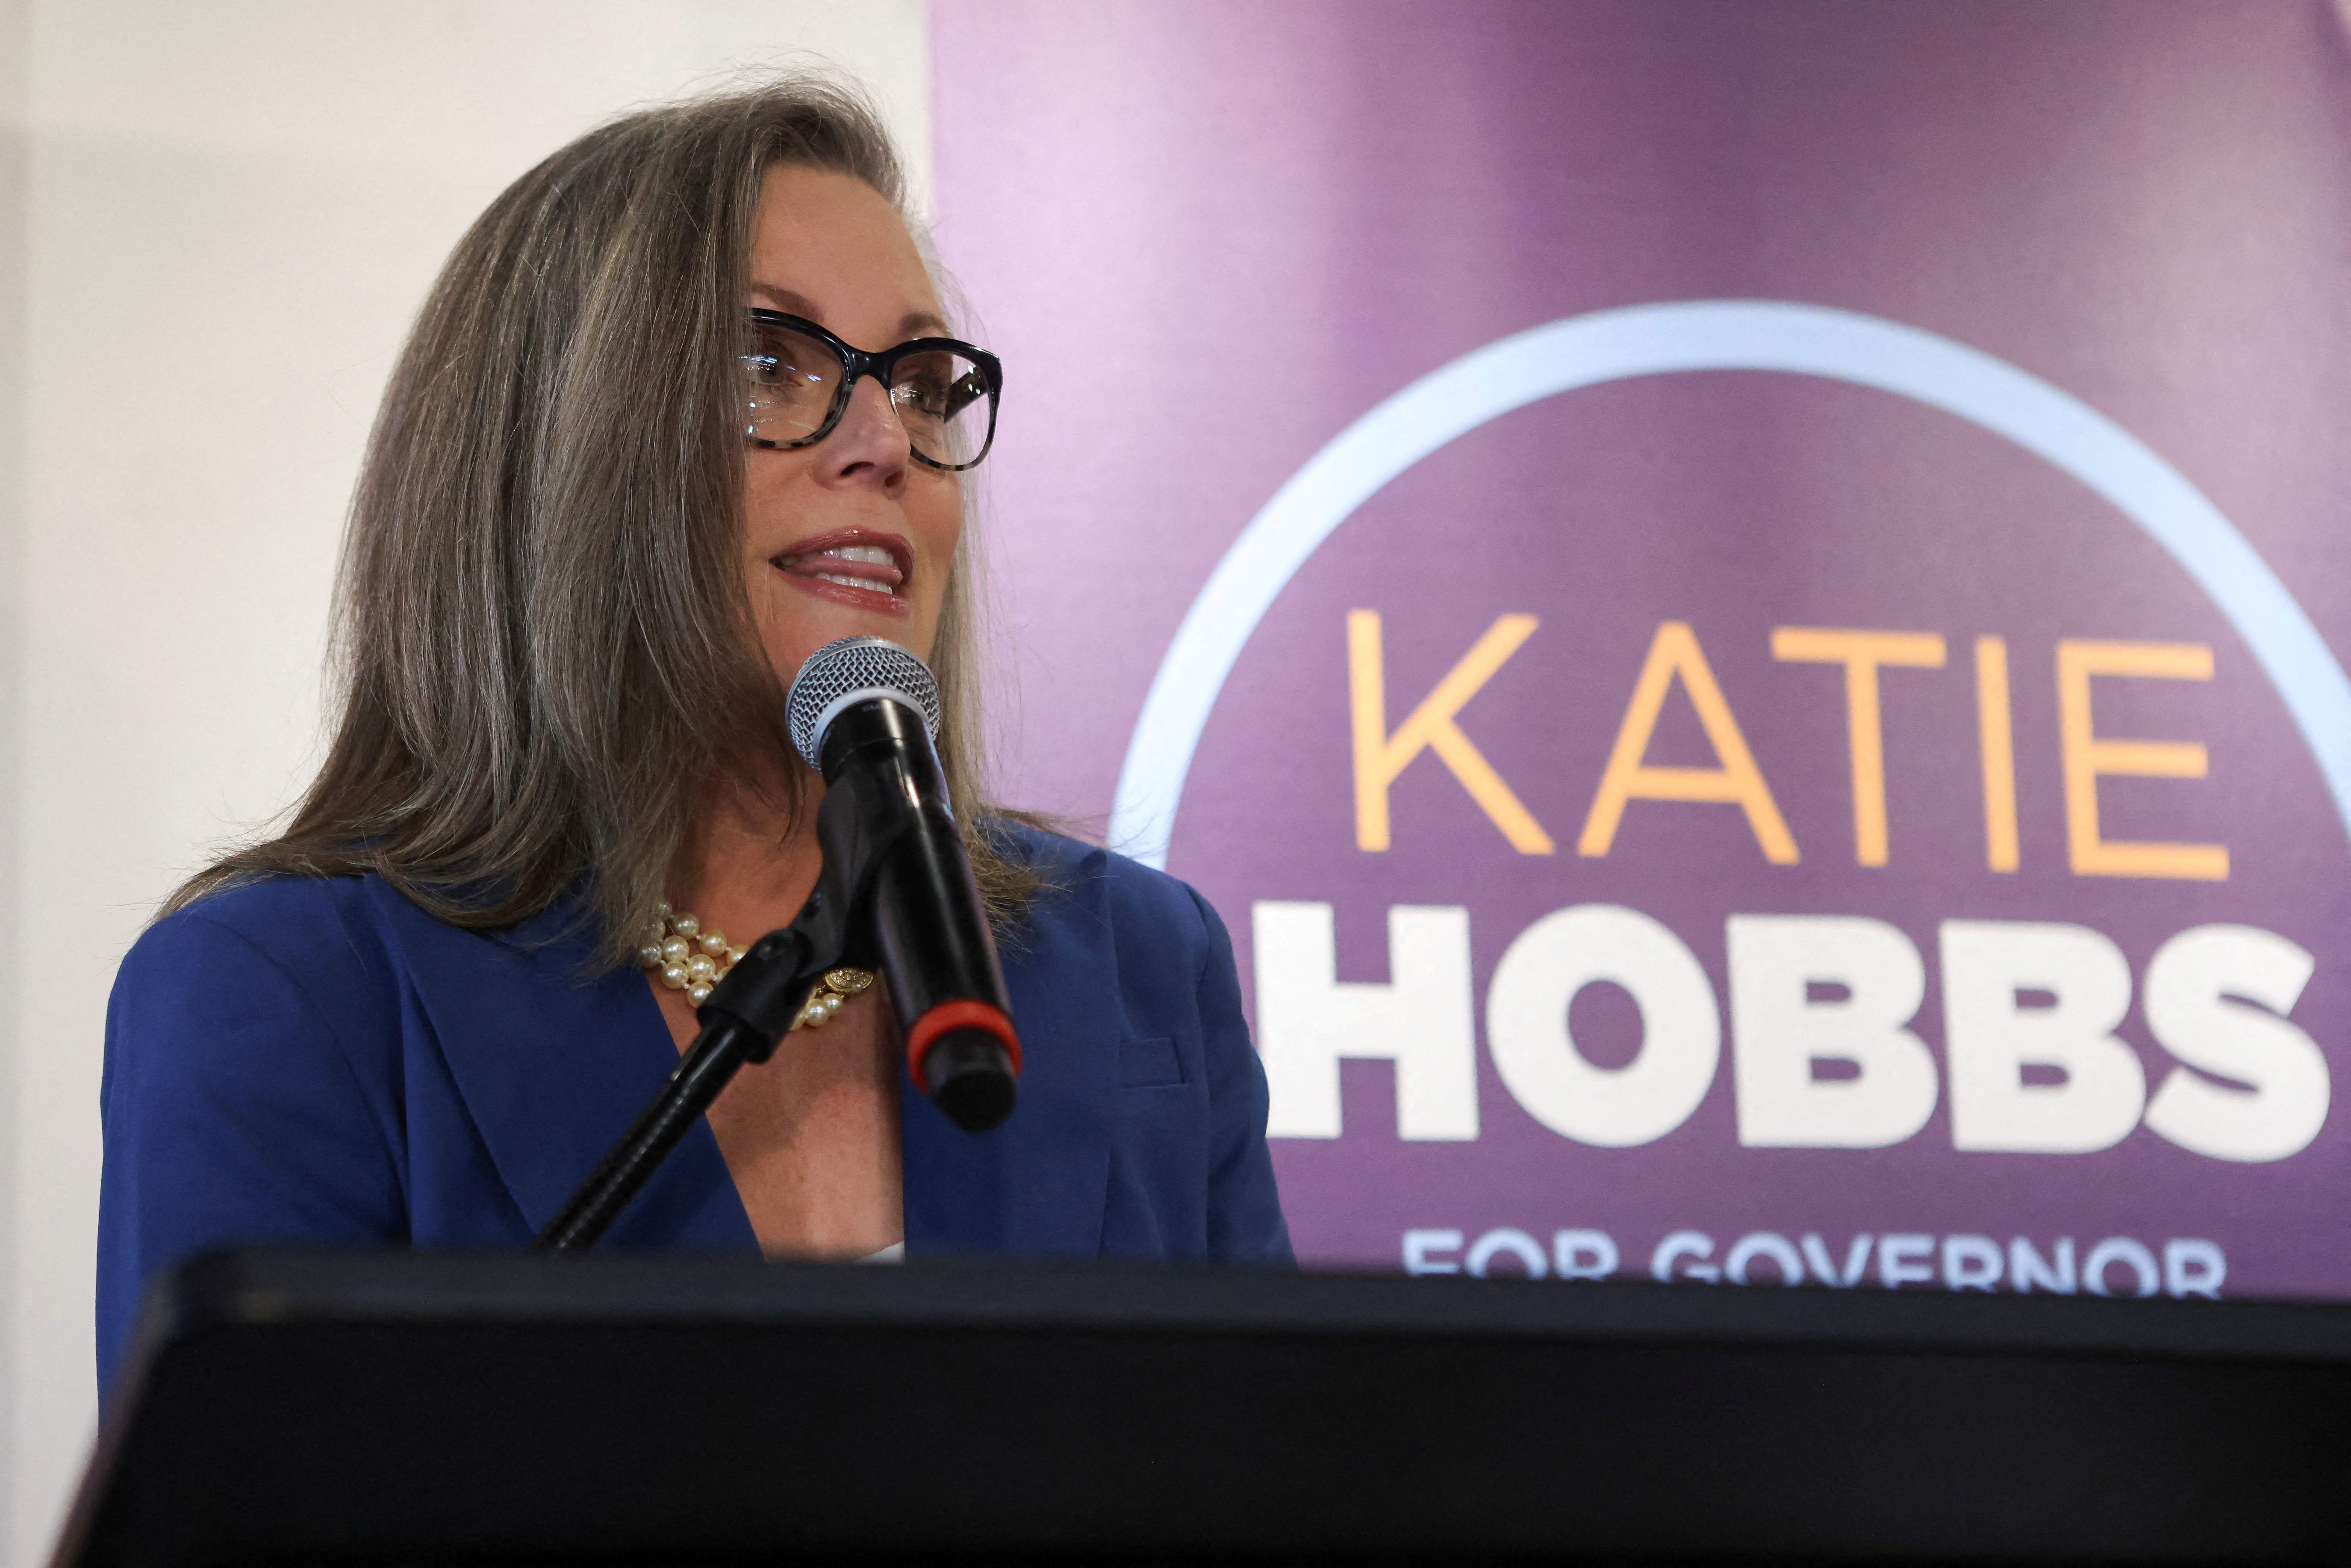 Democrat Katie Hobbs gives a victory speech after winning the race to become Arizona's next governor, in Phoenix